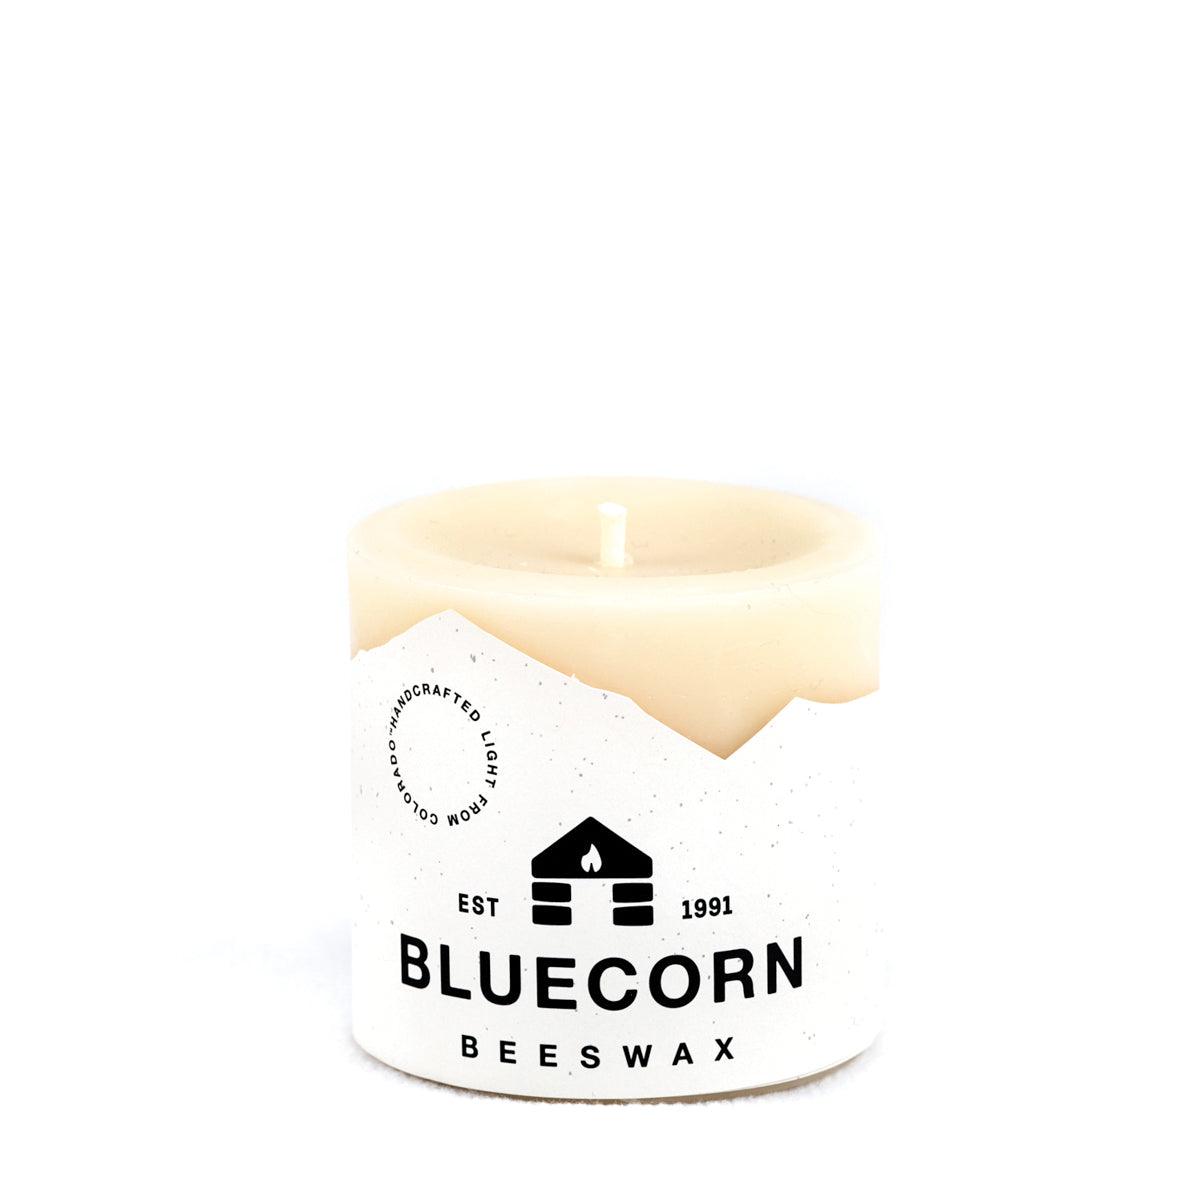 Bluecorn Beeswax 100% Pure Beeswax 3" x 3" Ivory Pillar Candle. Burn Time: 50 hours. Made with 100% Pure Beeswax, wax is white in color. Made with 100% pure cotton wick, no lead and paraffin free. Clean burning and non-toxic. Features Bluecorn Beeswax label printed on 100% recycled paper. Clearance items might have an odd blemish or air bubble, but will still burn beautifully.